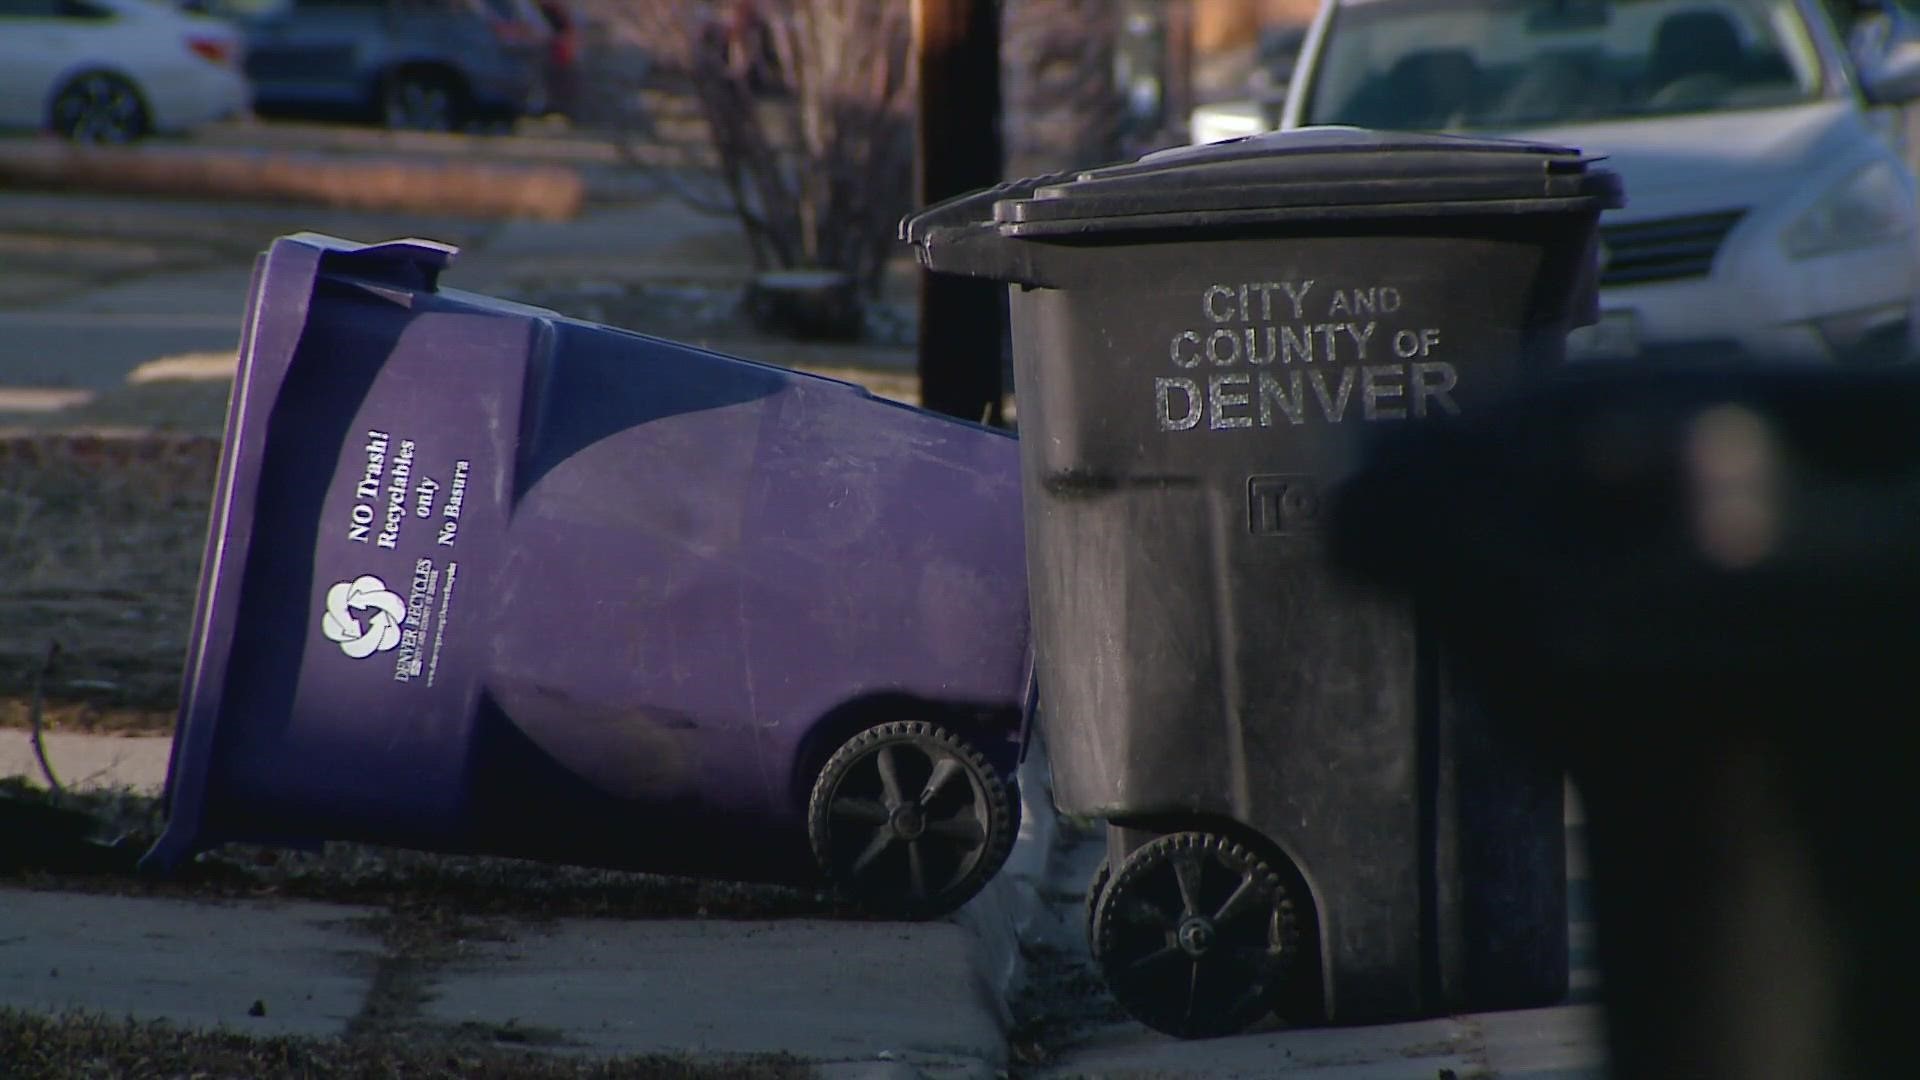 The first invoices are going out for Denver's new trash program.